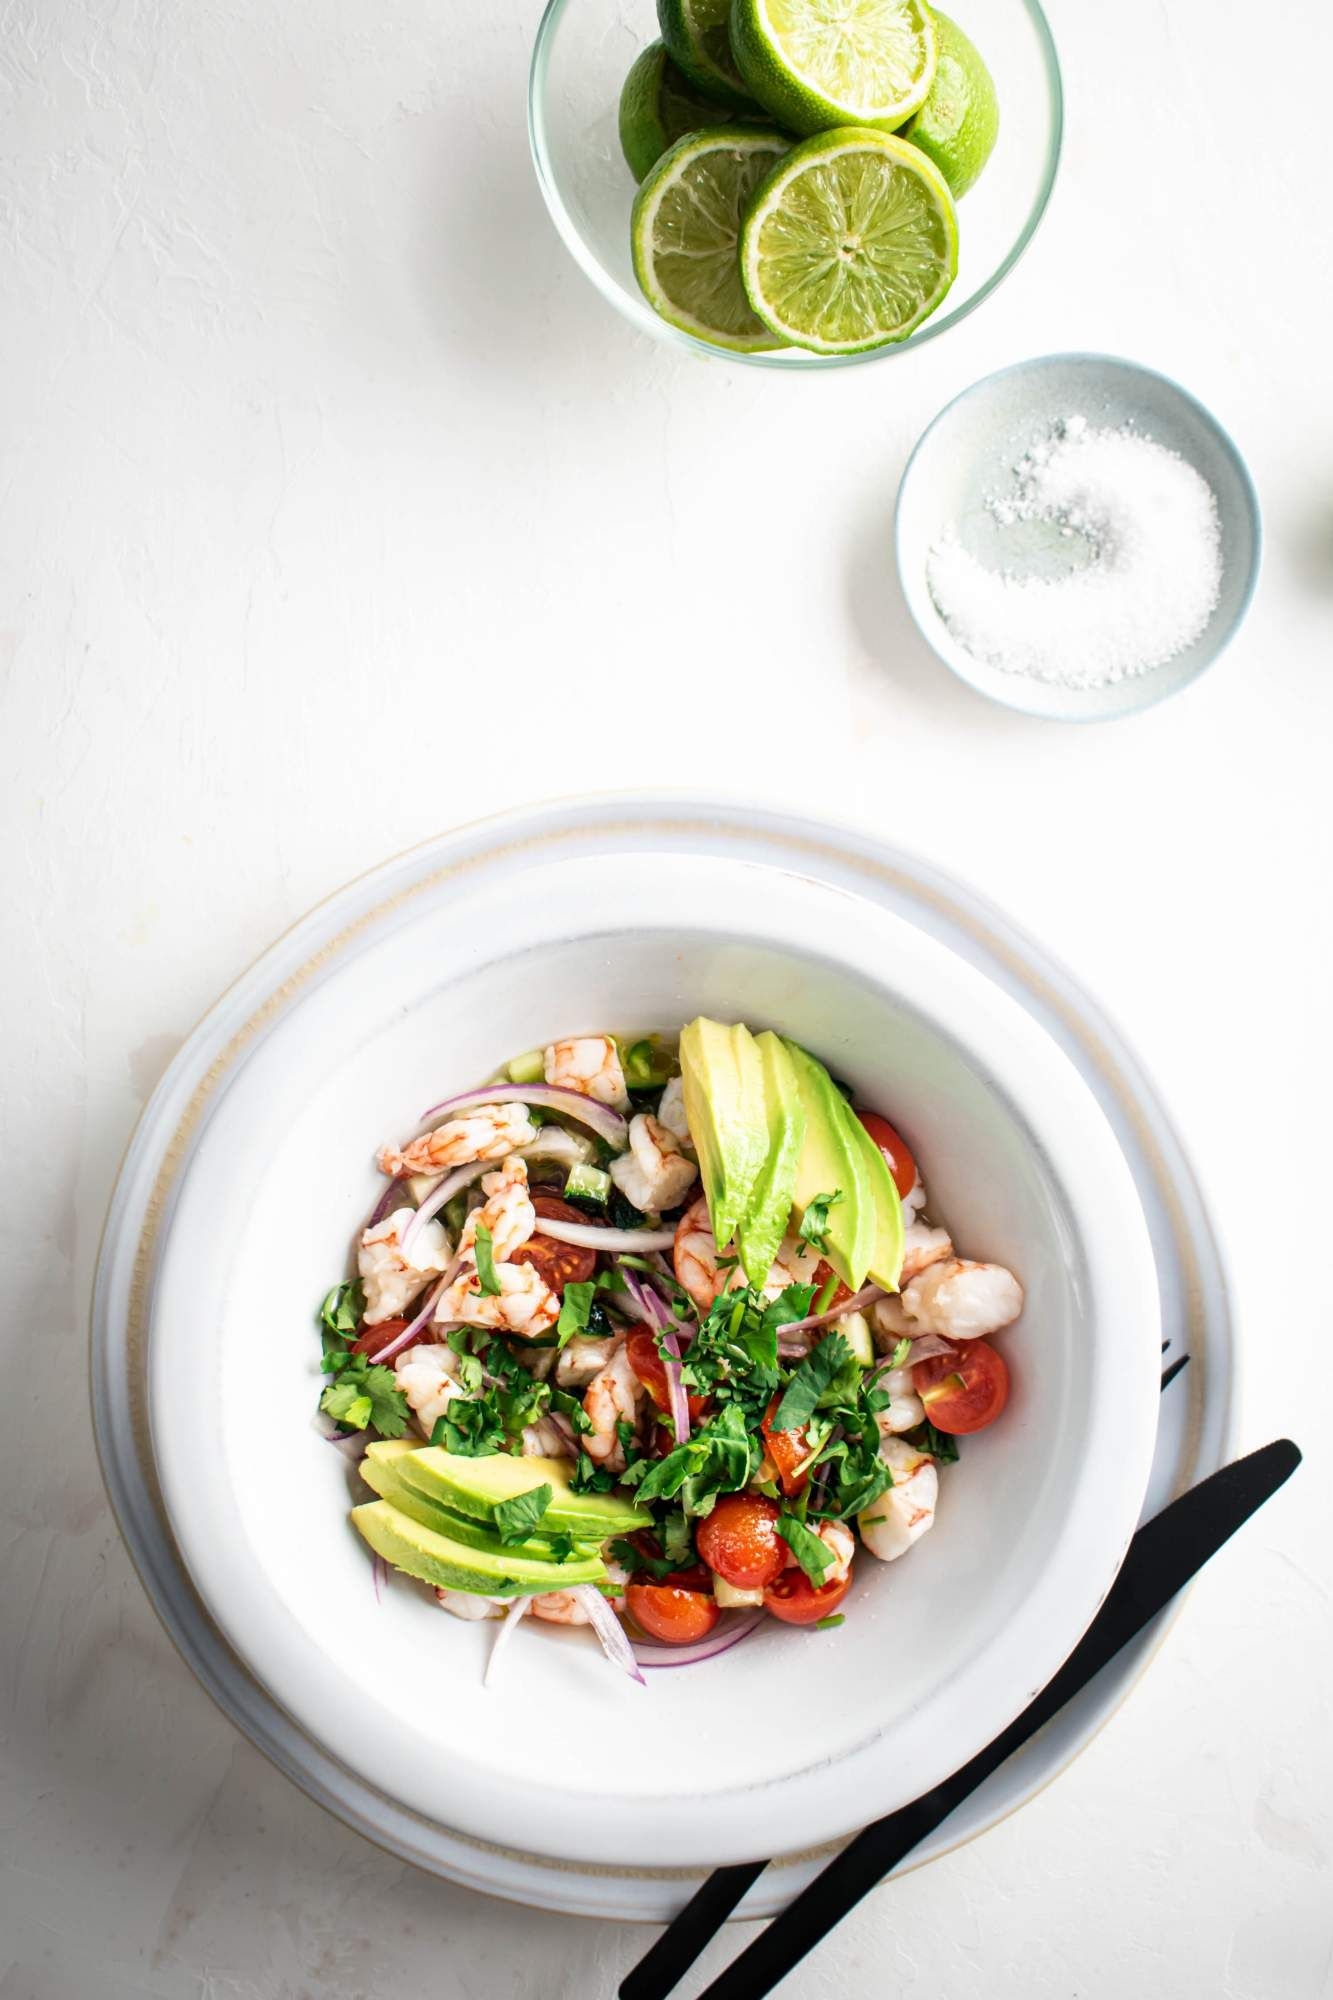 Ceviche with shrimp, avocado, cilantro, tomato, cucumber, and lime juice in a bowl.